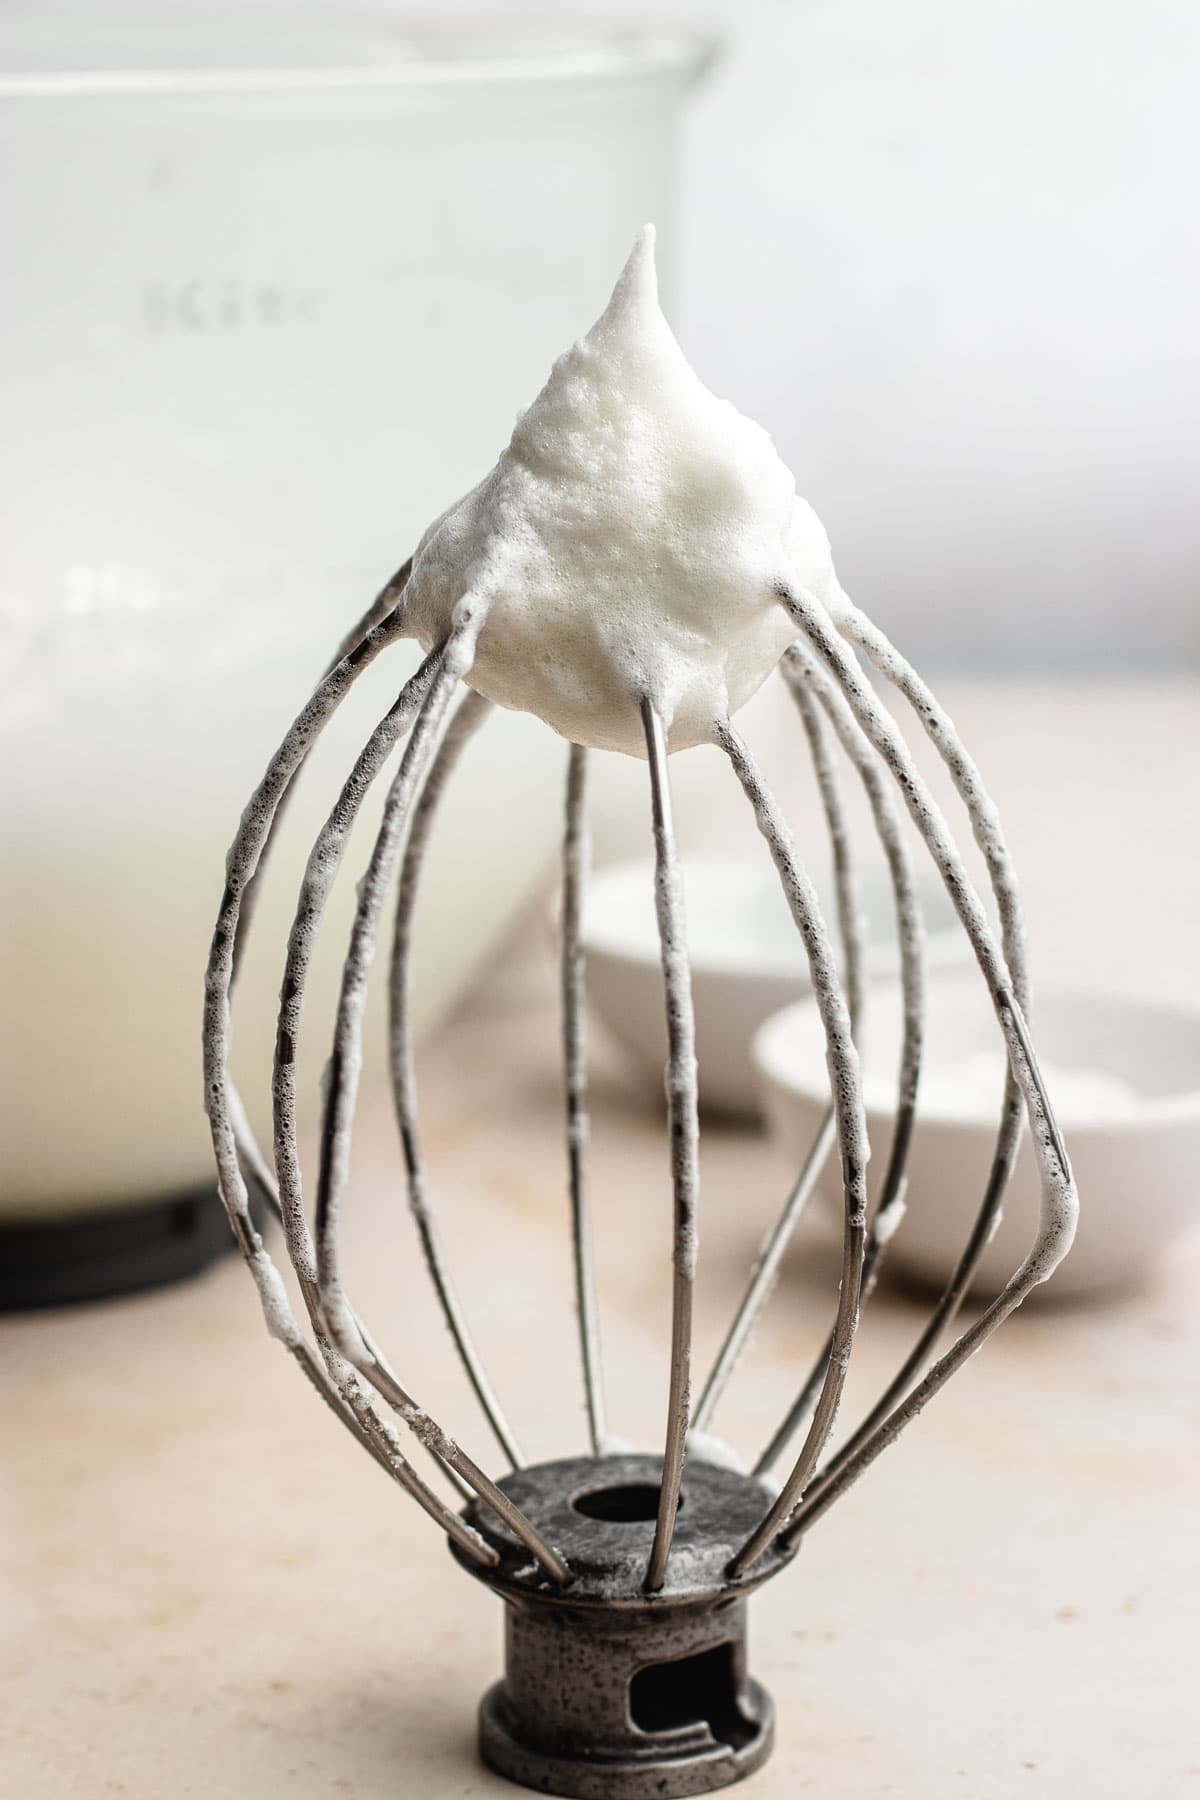 Lady Baltimore Cake whisk sitting with tip upright with whipped egg whites on tip